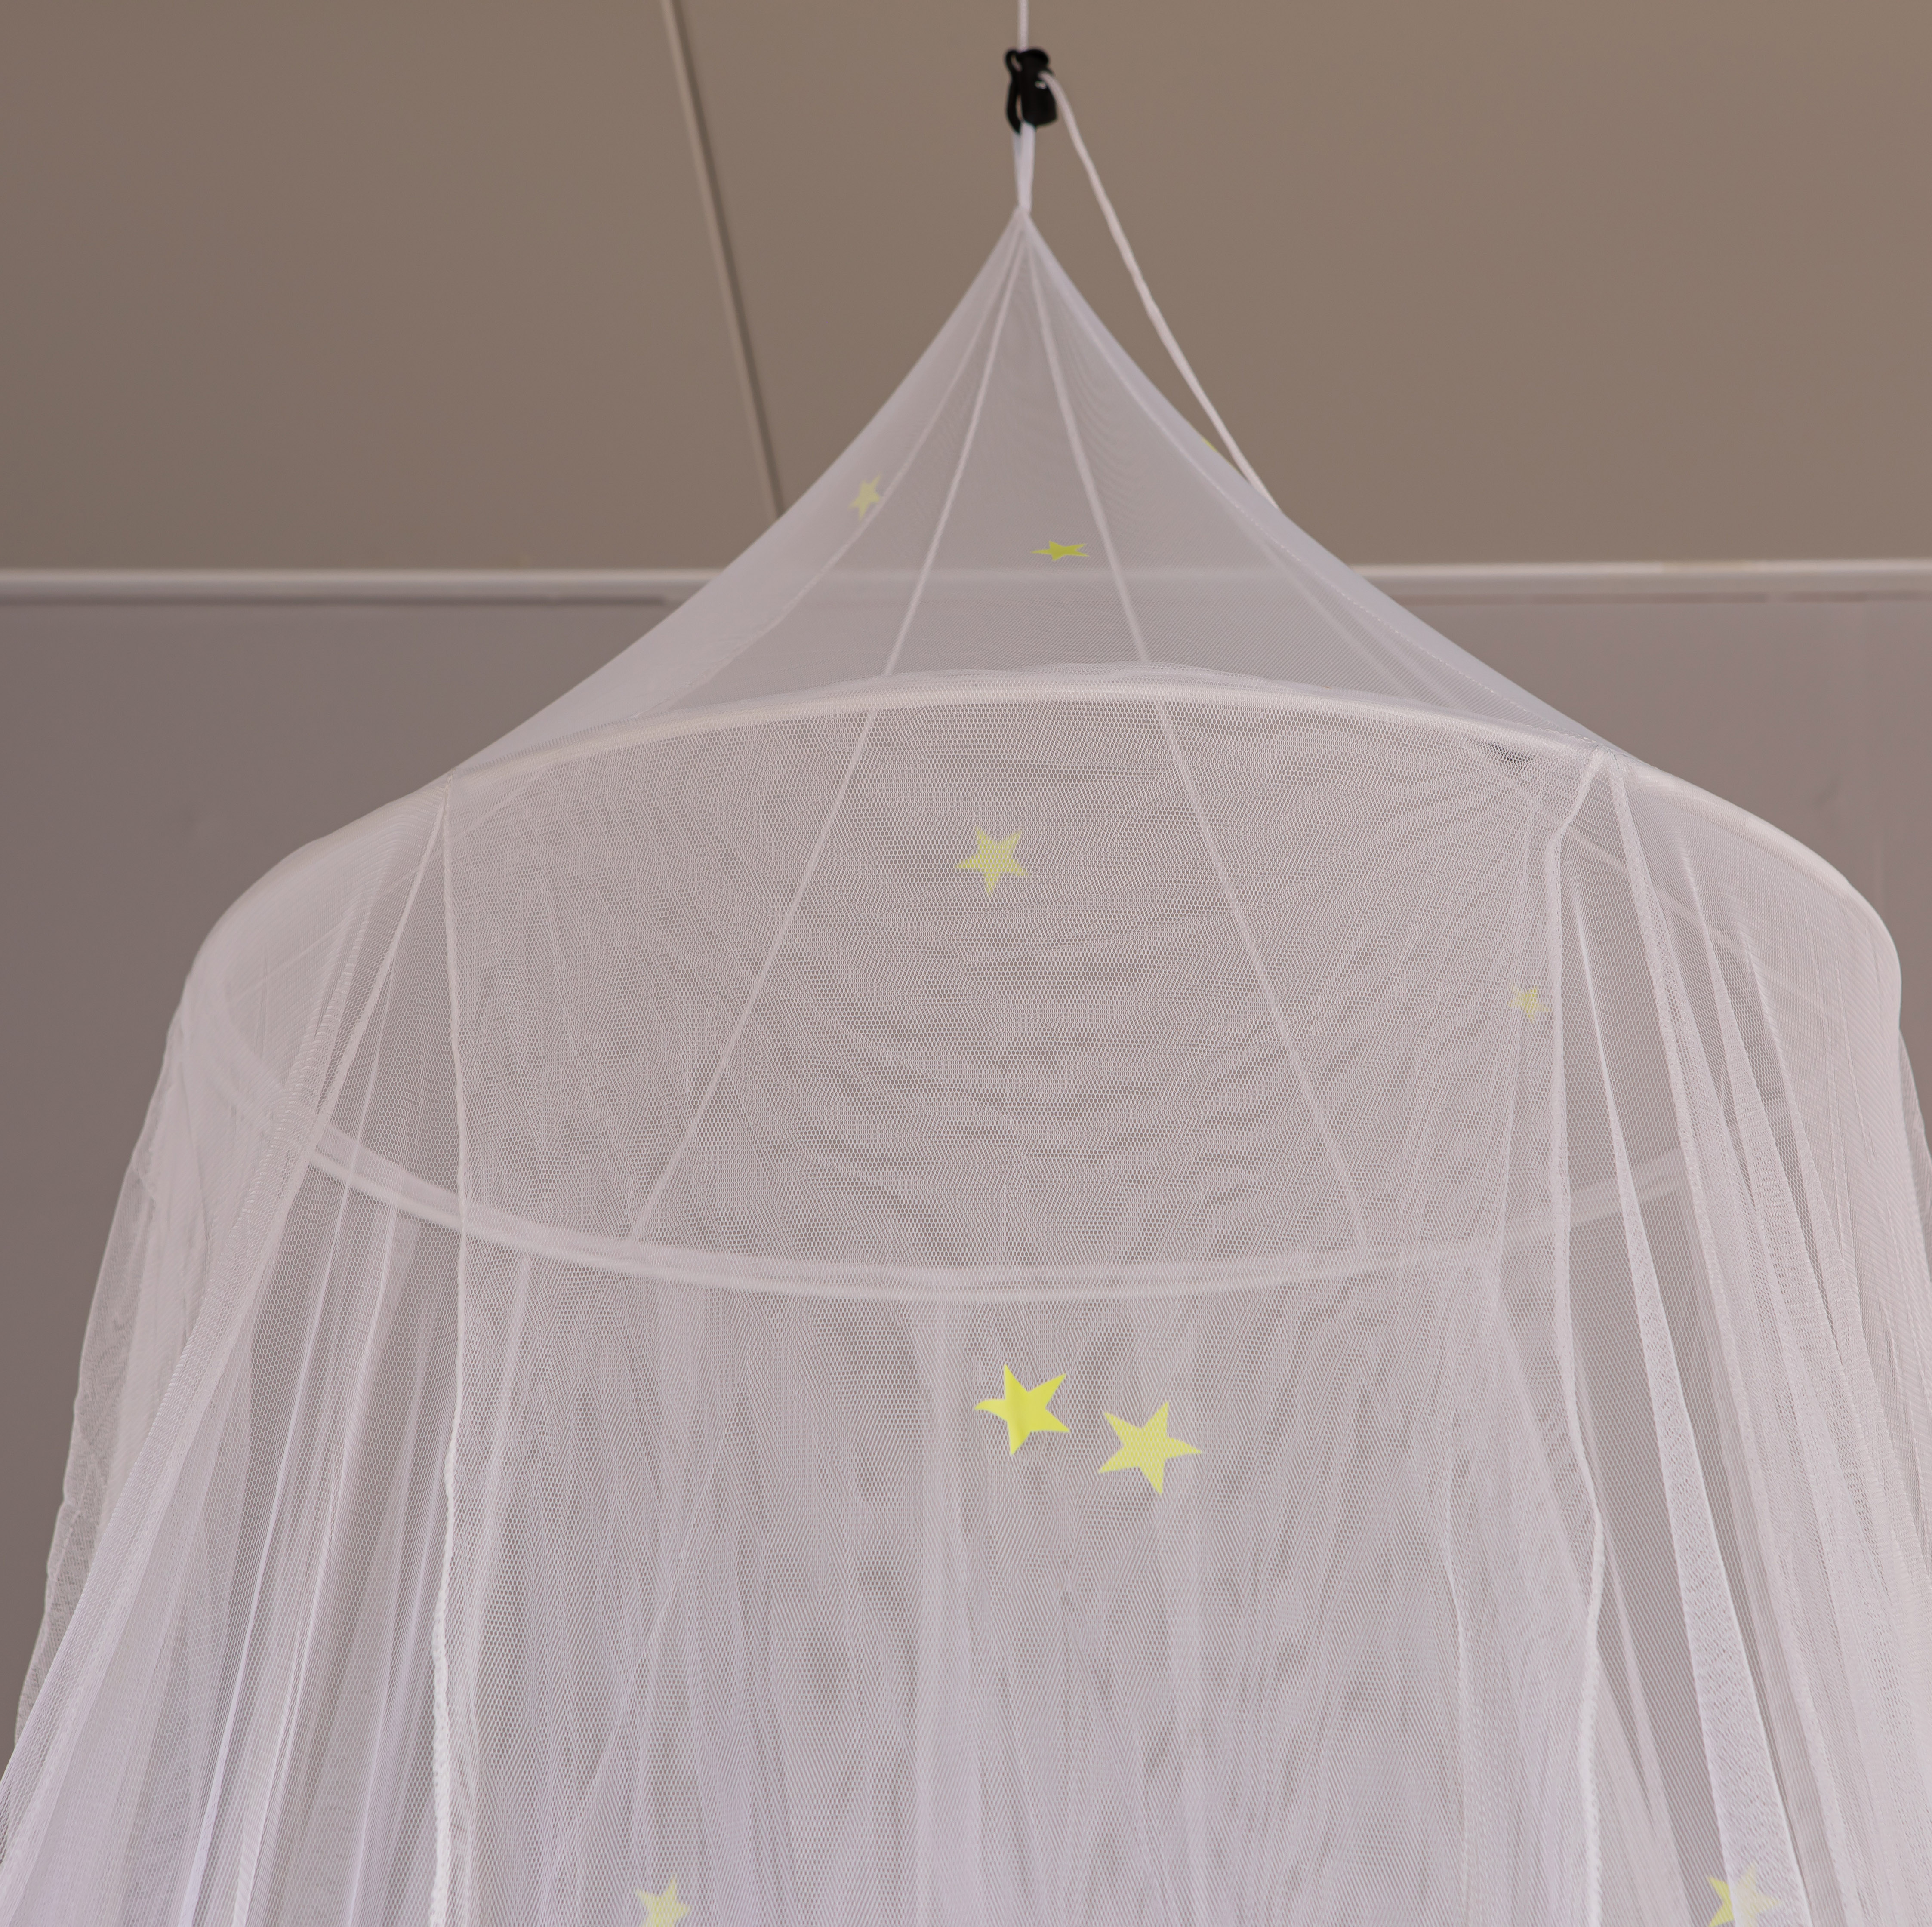 Mysterious Growing In The Dark Stars White Concial Mosquito Net Bed Canopy